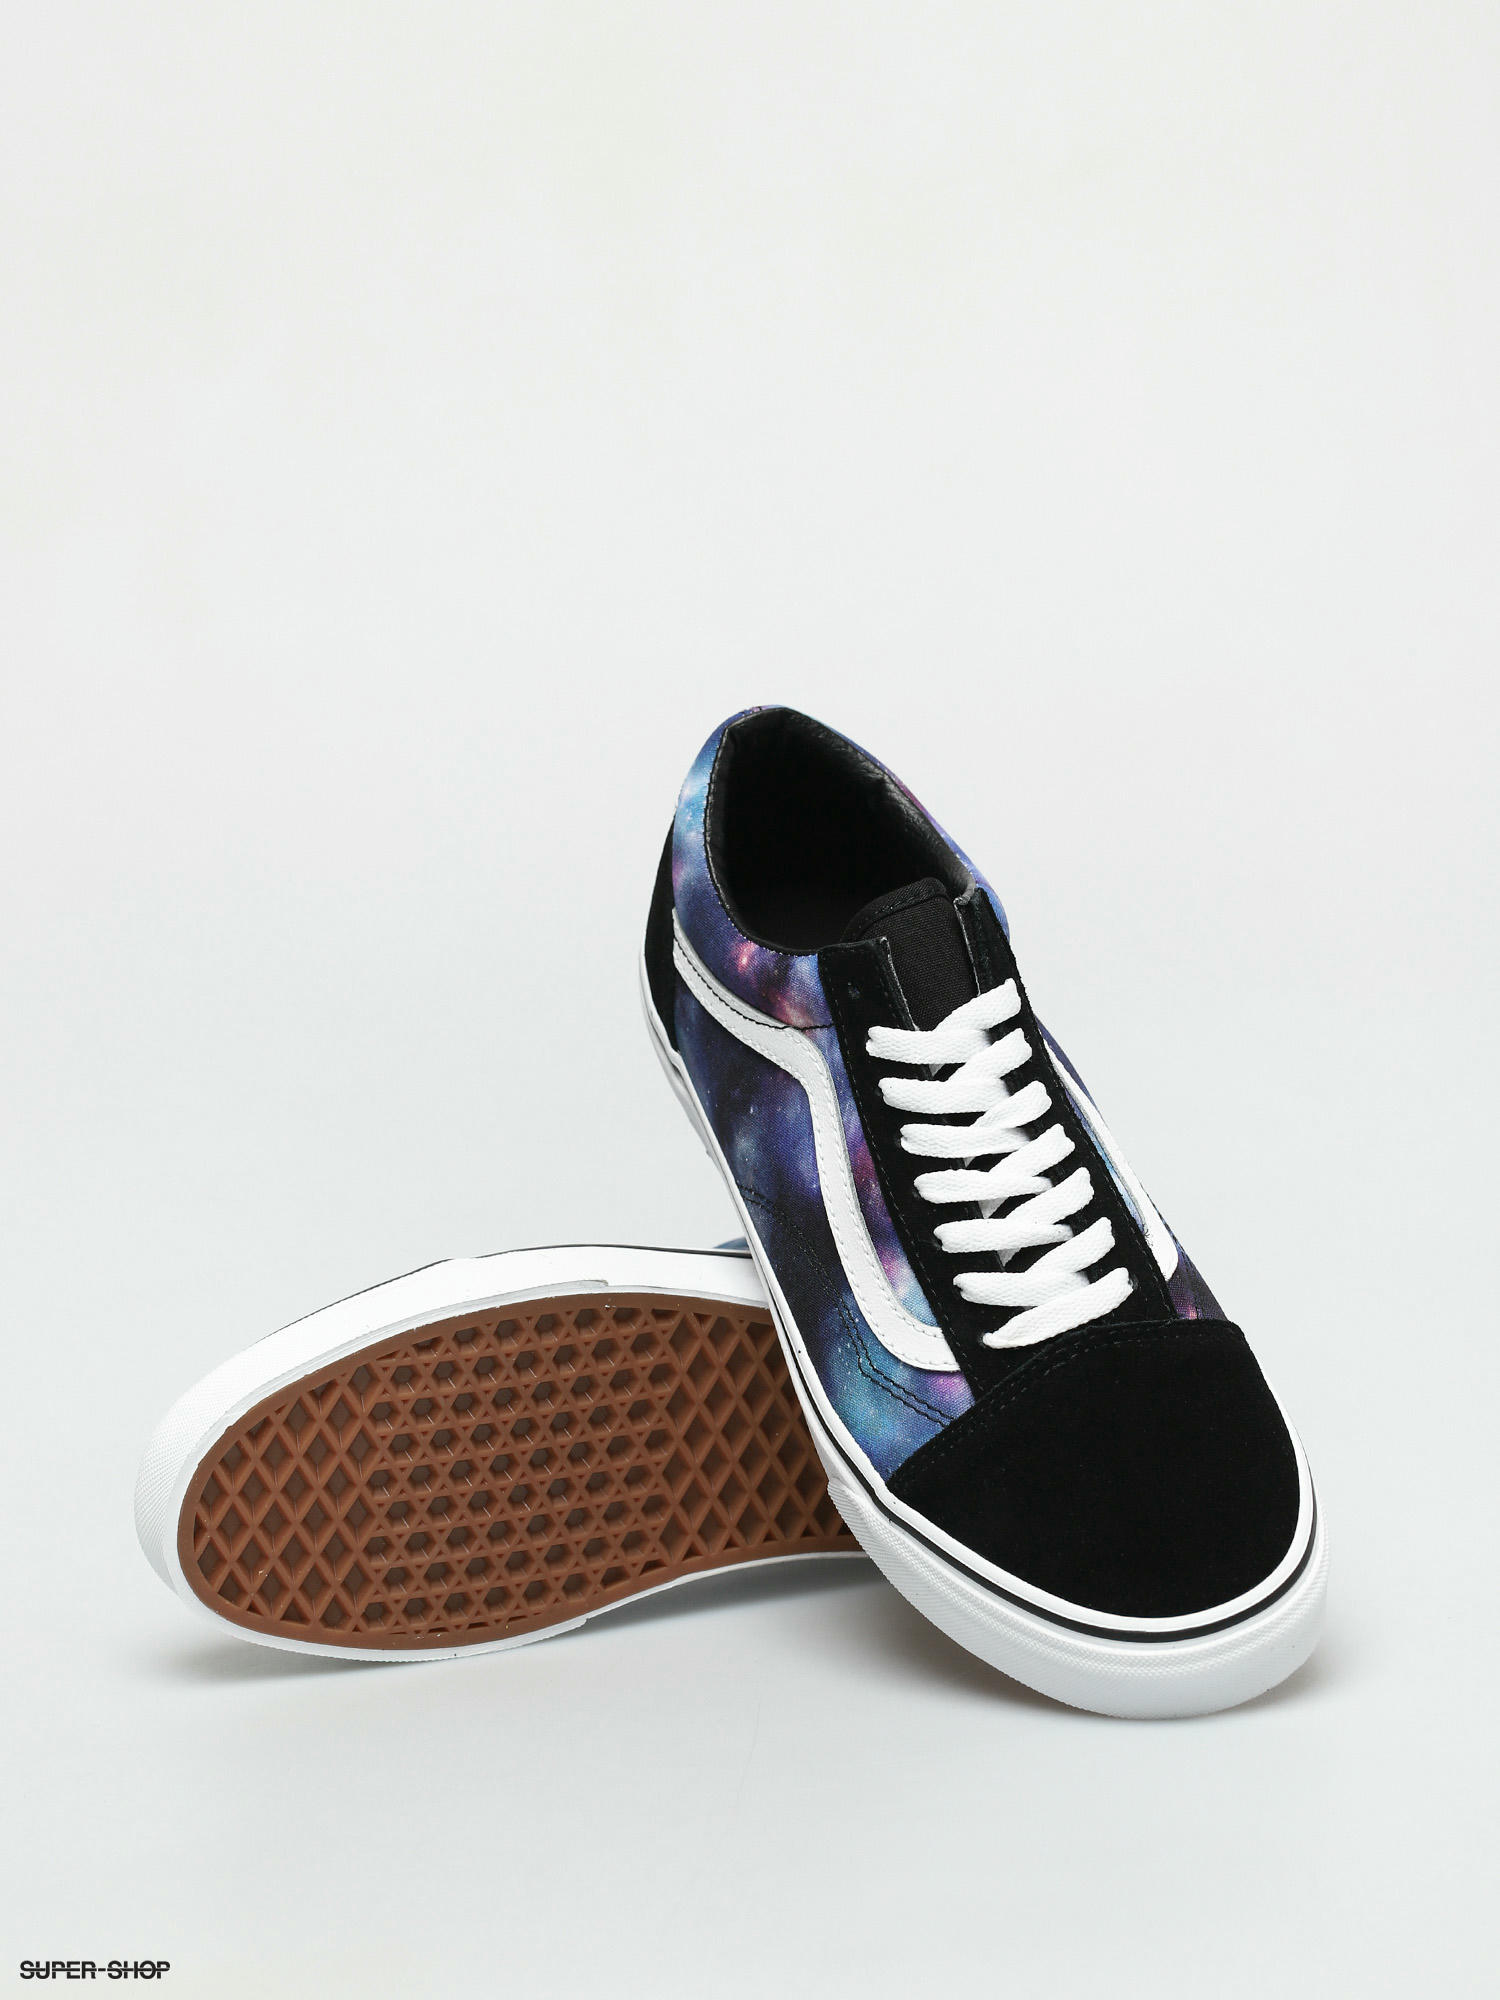 where to buy galaxy vans shoes